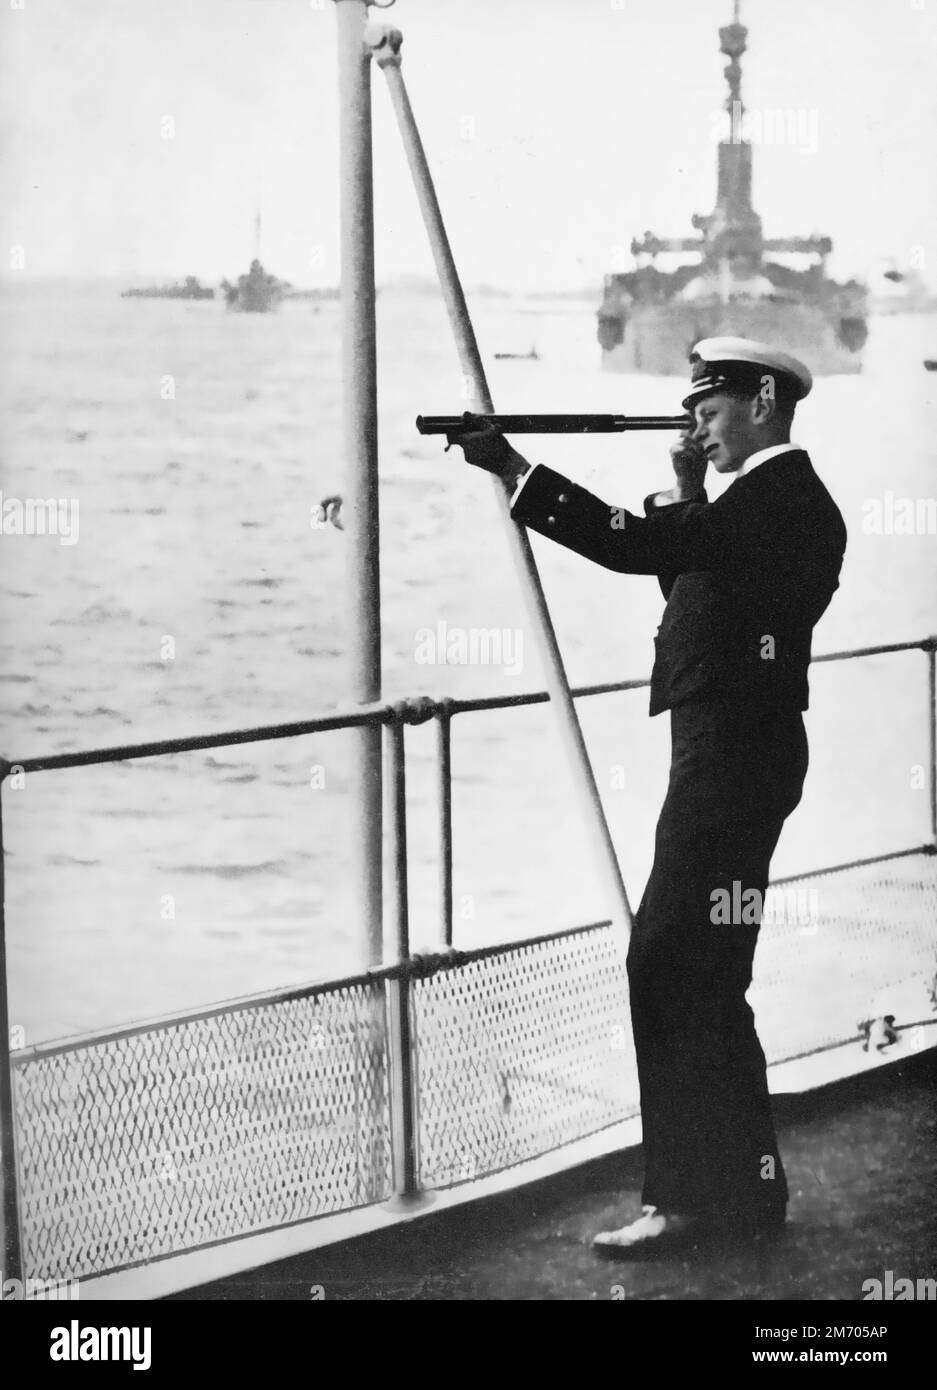 Midshipman, Prince Albert, watching the Spithead Review, July 1914. The future King George VI (1895-1952) watching the mobilisation of the Royal Navy fleet. From 18th to 20th July 1914, the naval fleet of the United Kingdom was mobilised for World War I. Stock Photo